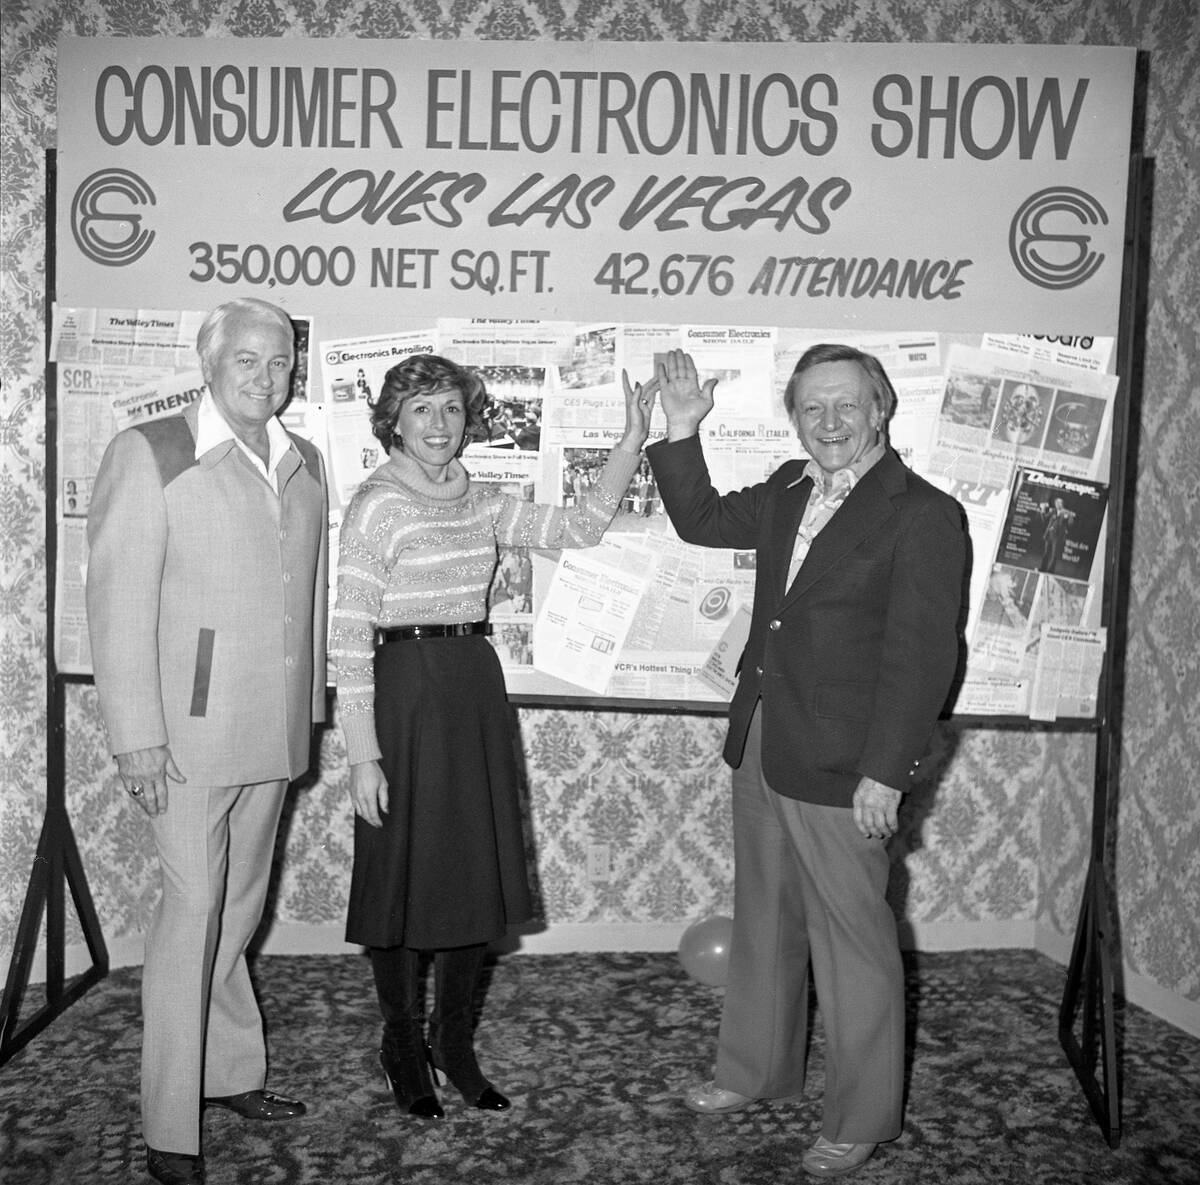 The first International Consumer Electronics Show (CES) that was held in Las Vegas photos inclu ...